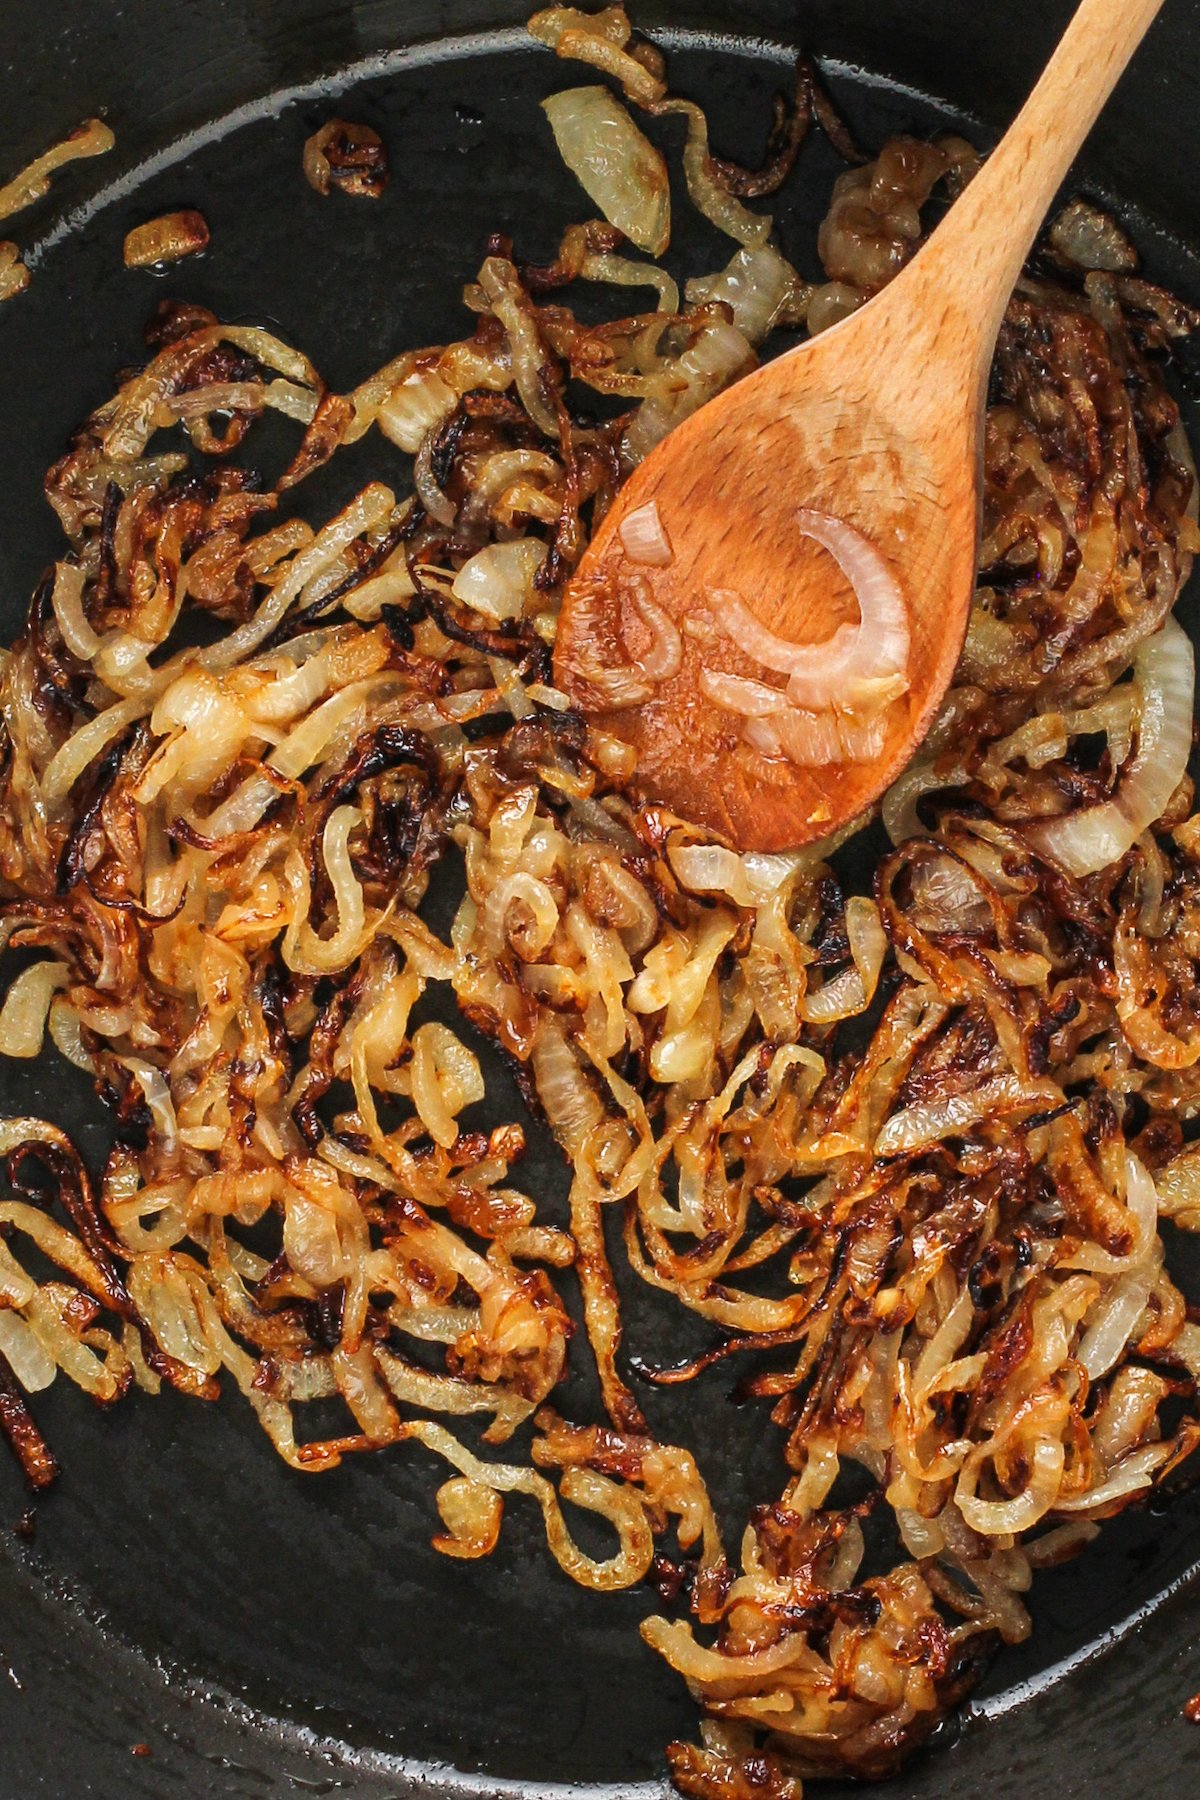 Caramelized onions in the pan.